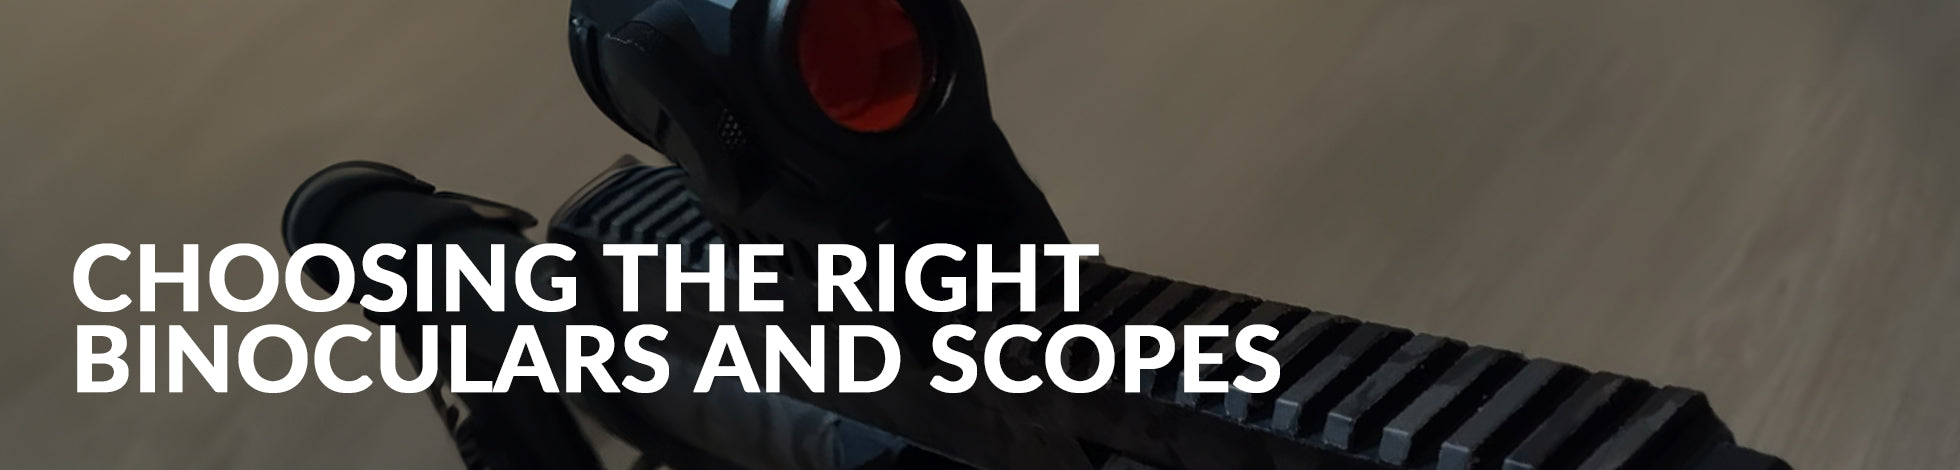 Choosing the Right Binoculars and Scopes